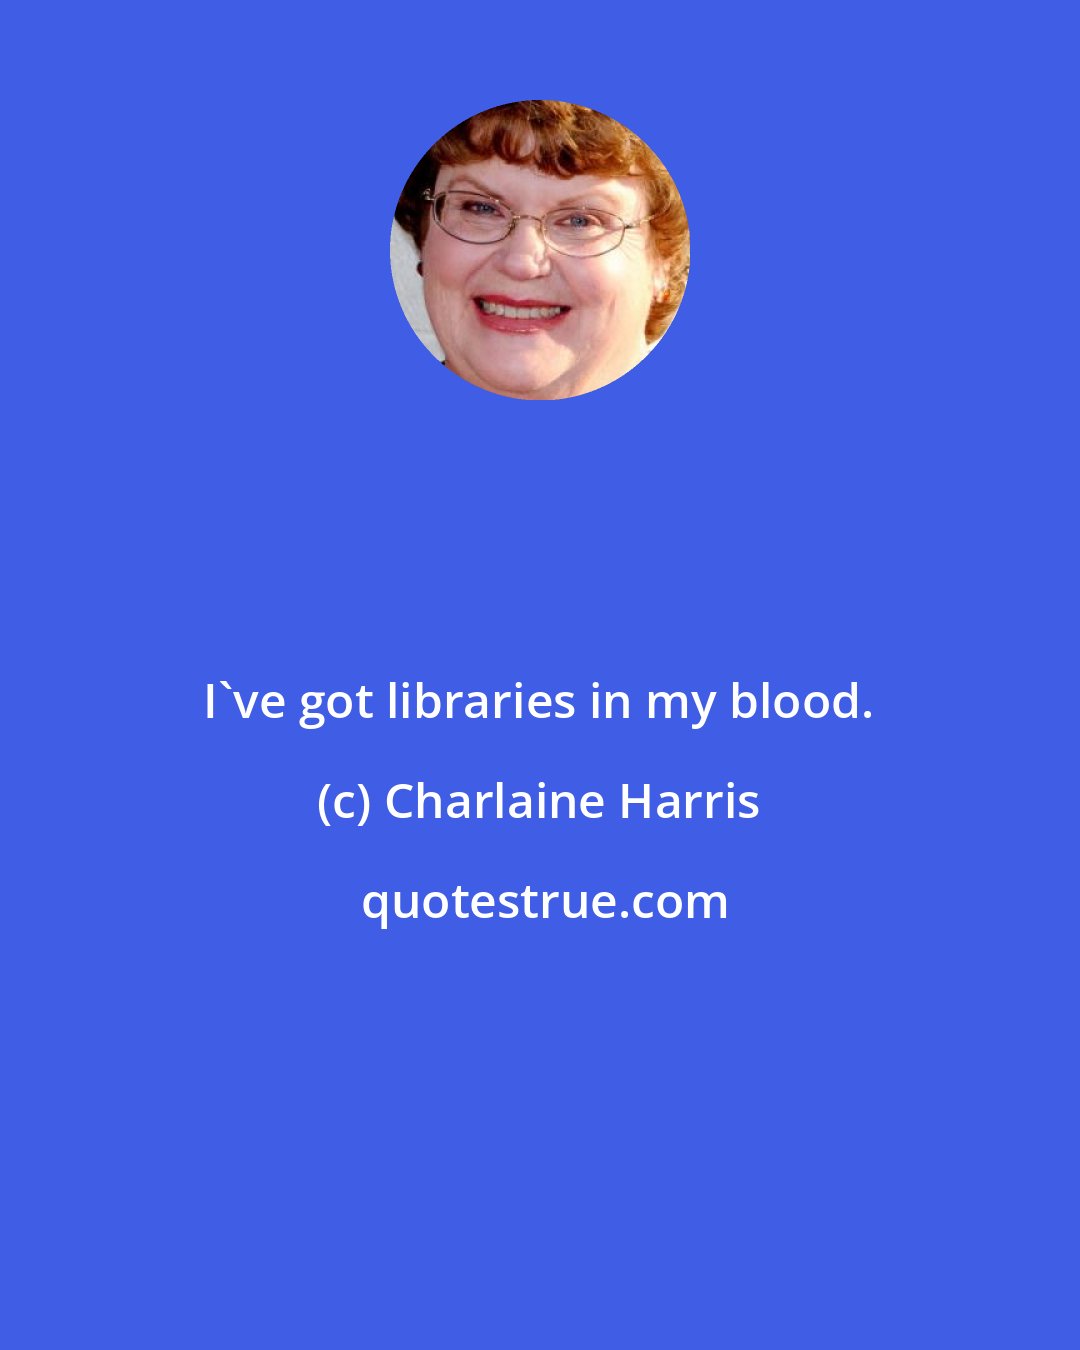 Charlaine Harris: I've got libraries in my blood.